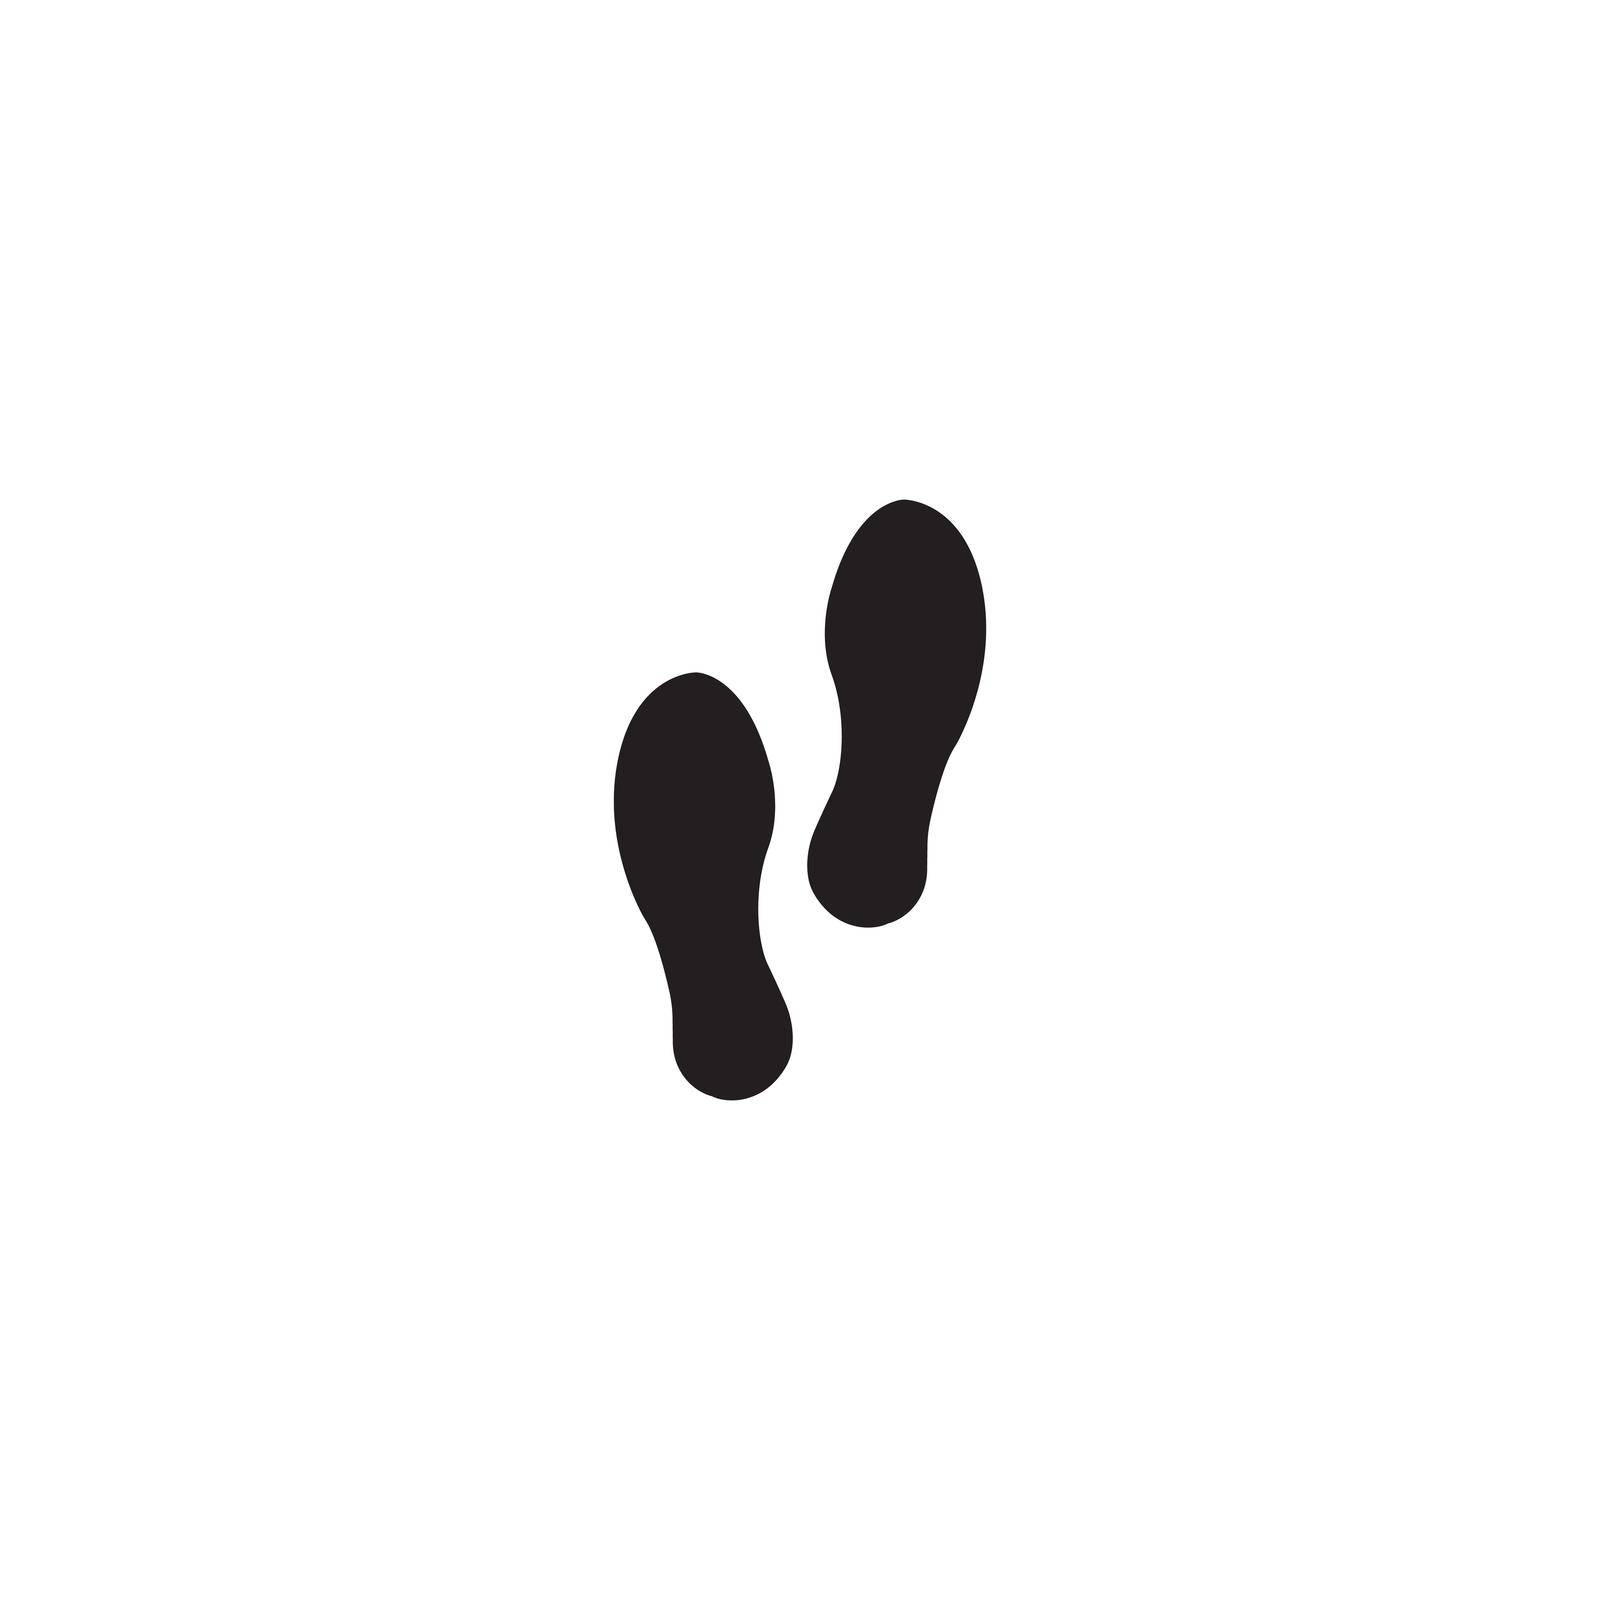 Feet icon by rnking